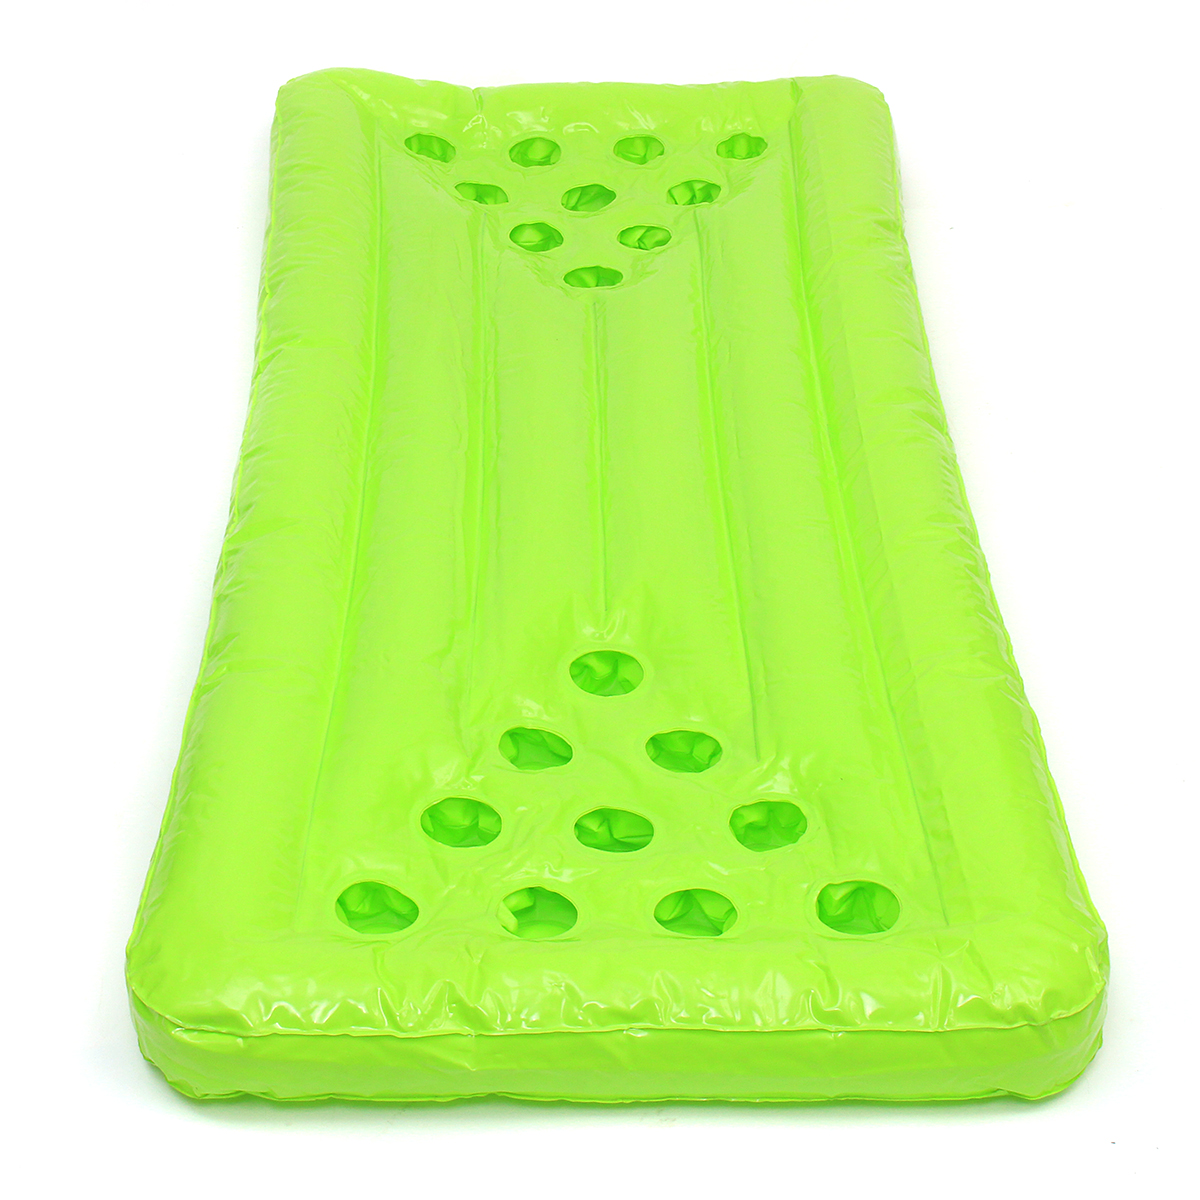 PVC-Inflatable-Beer-Pong-Table-22-Cup-Holes-Water-Floating-For-Pool-Party-Drinking-Game-1231571-3